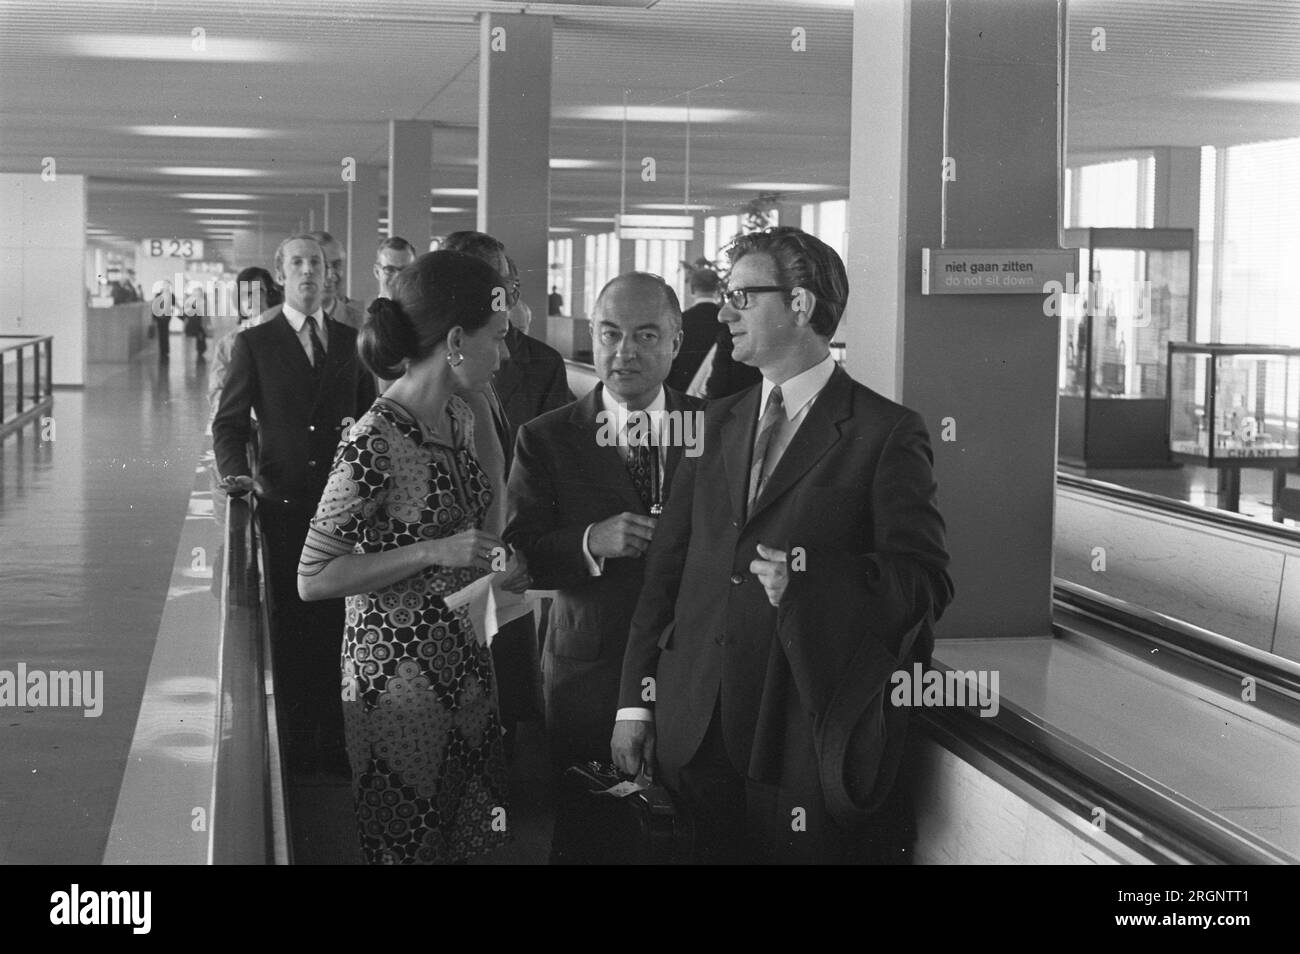 Minister Schmelzer and State Secretary Westerterp (r) return from Rome at Schiphol; ca. September 1972 Stock Photo